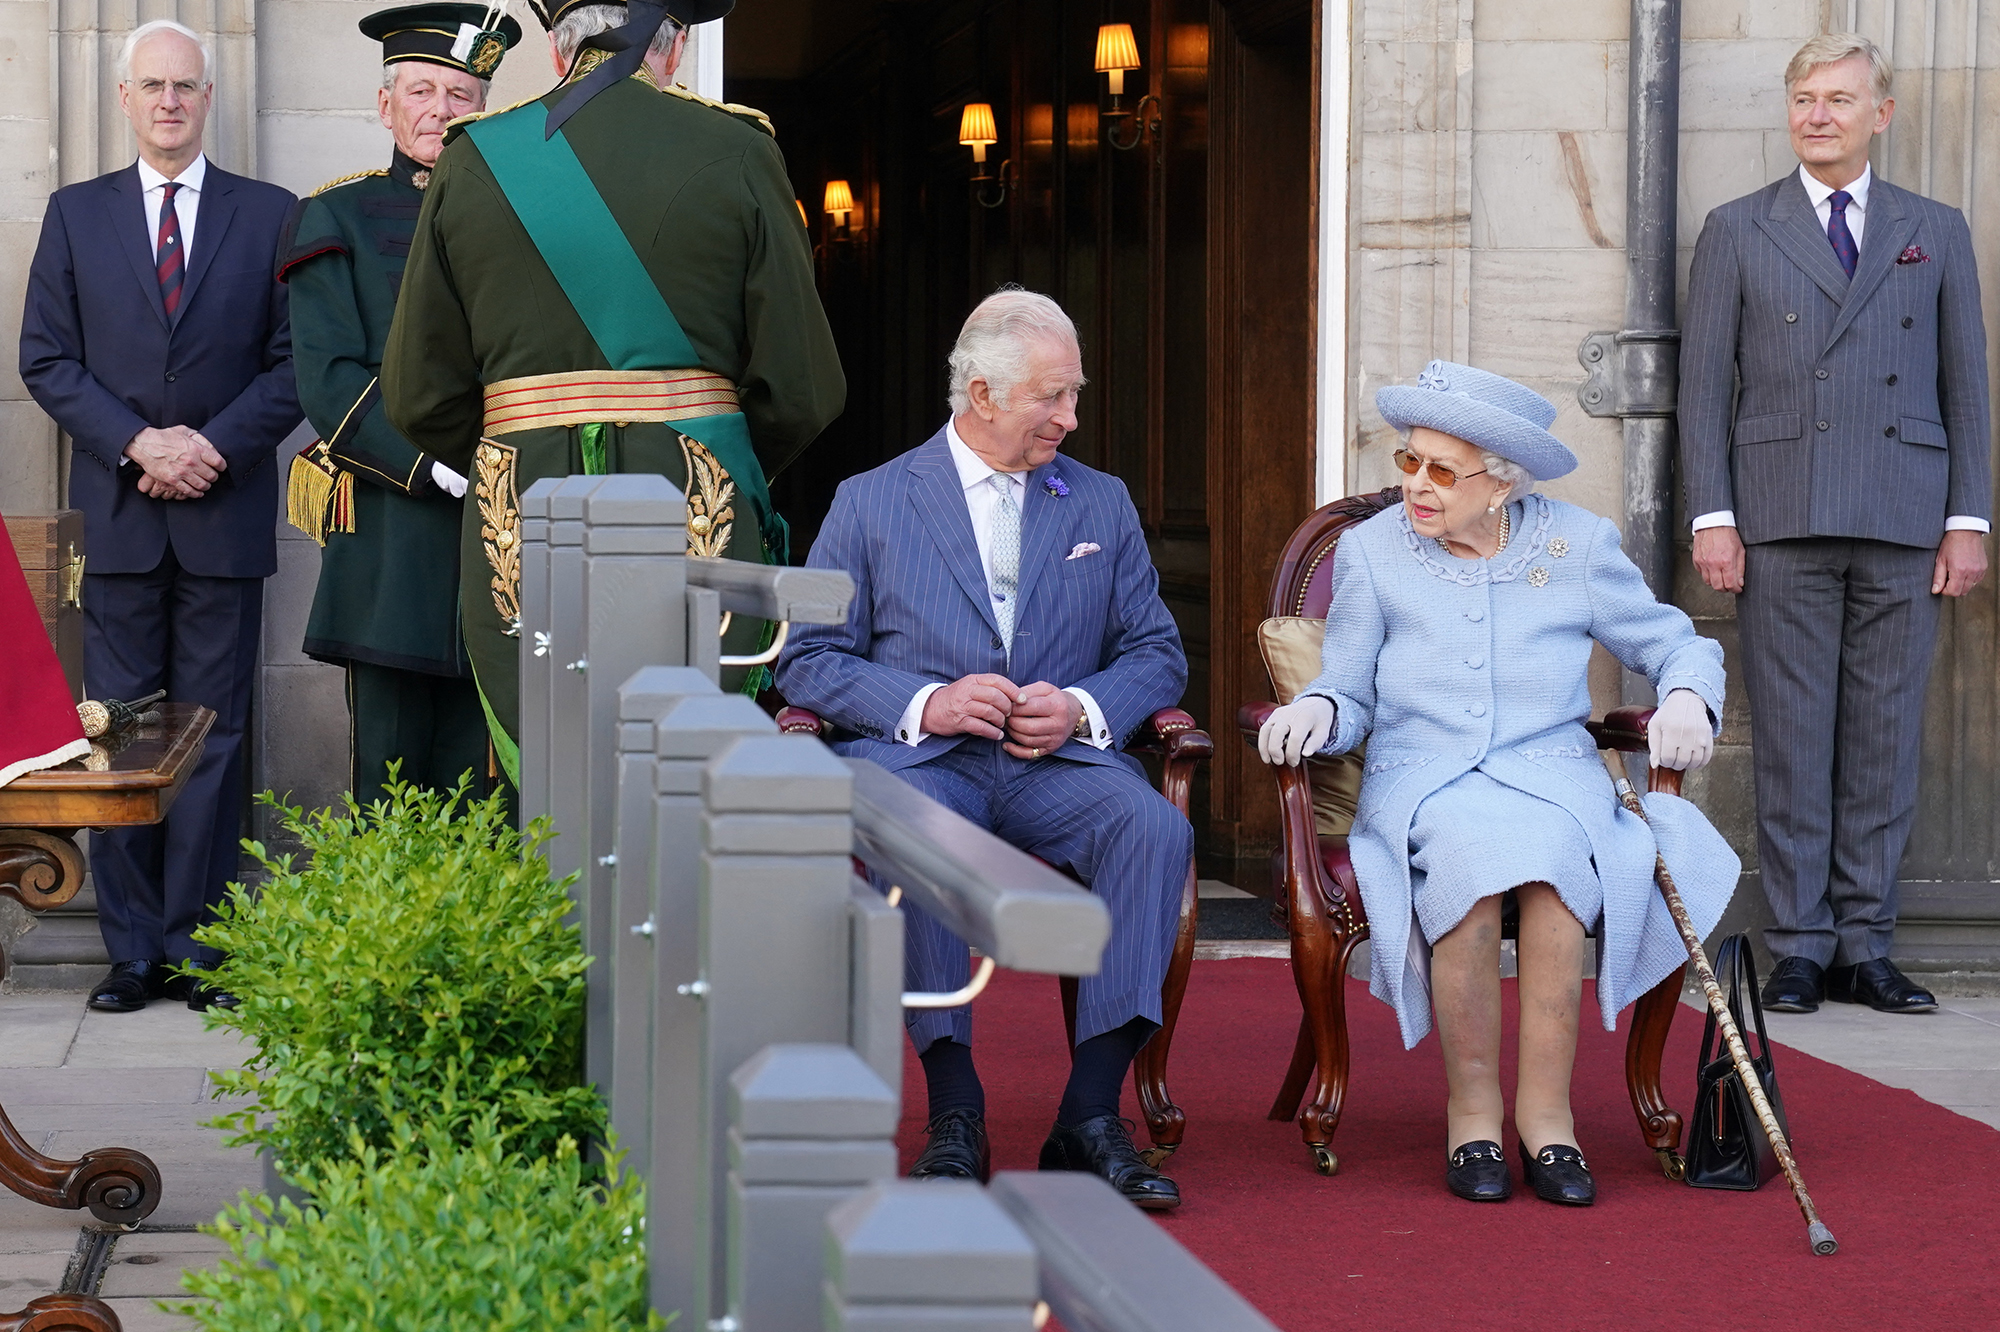 Charles and Queen Elizabeth seated in chairs on a red carpet outside a royal entrance in Scotland.